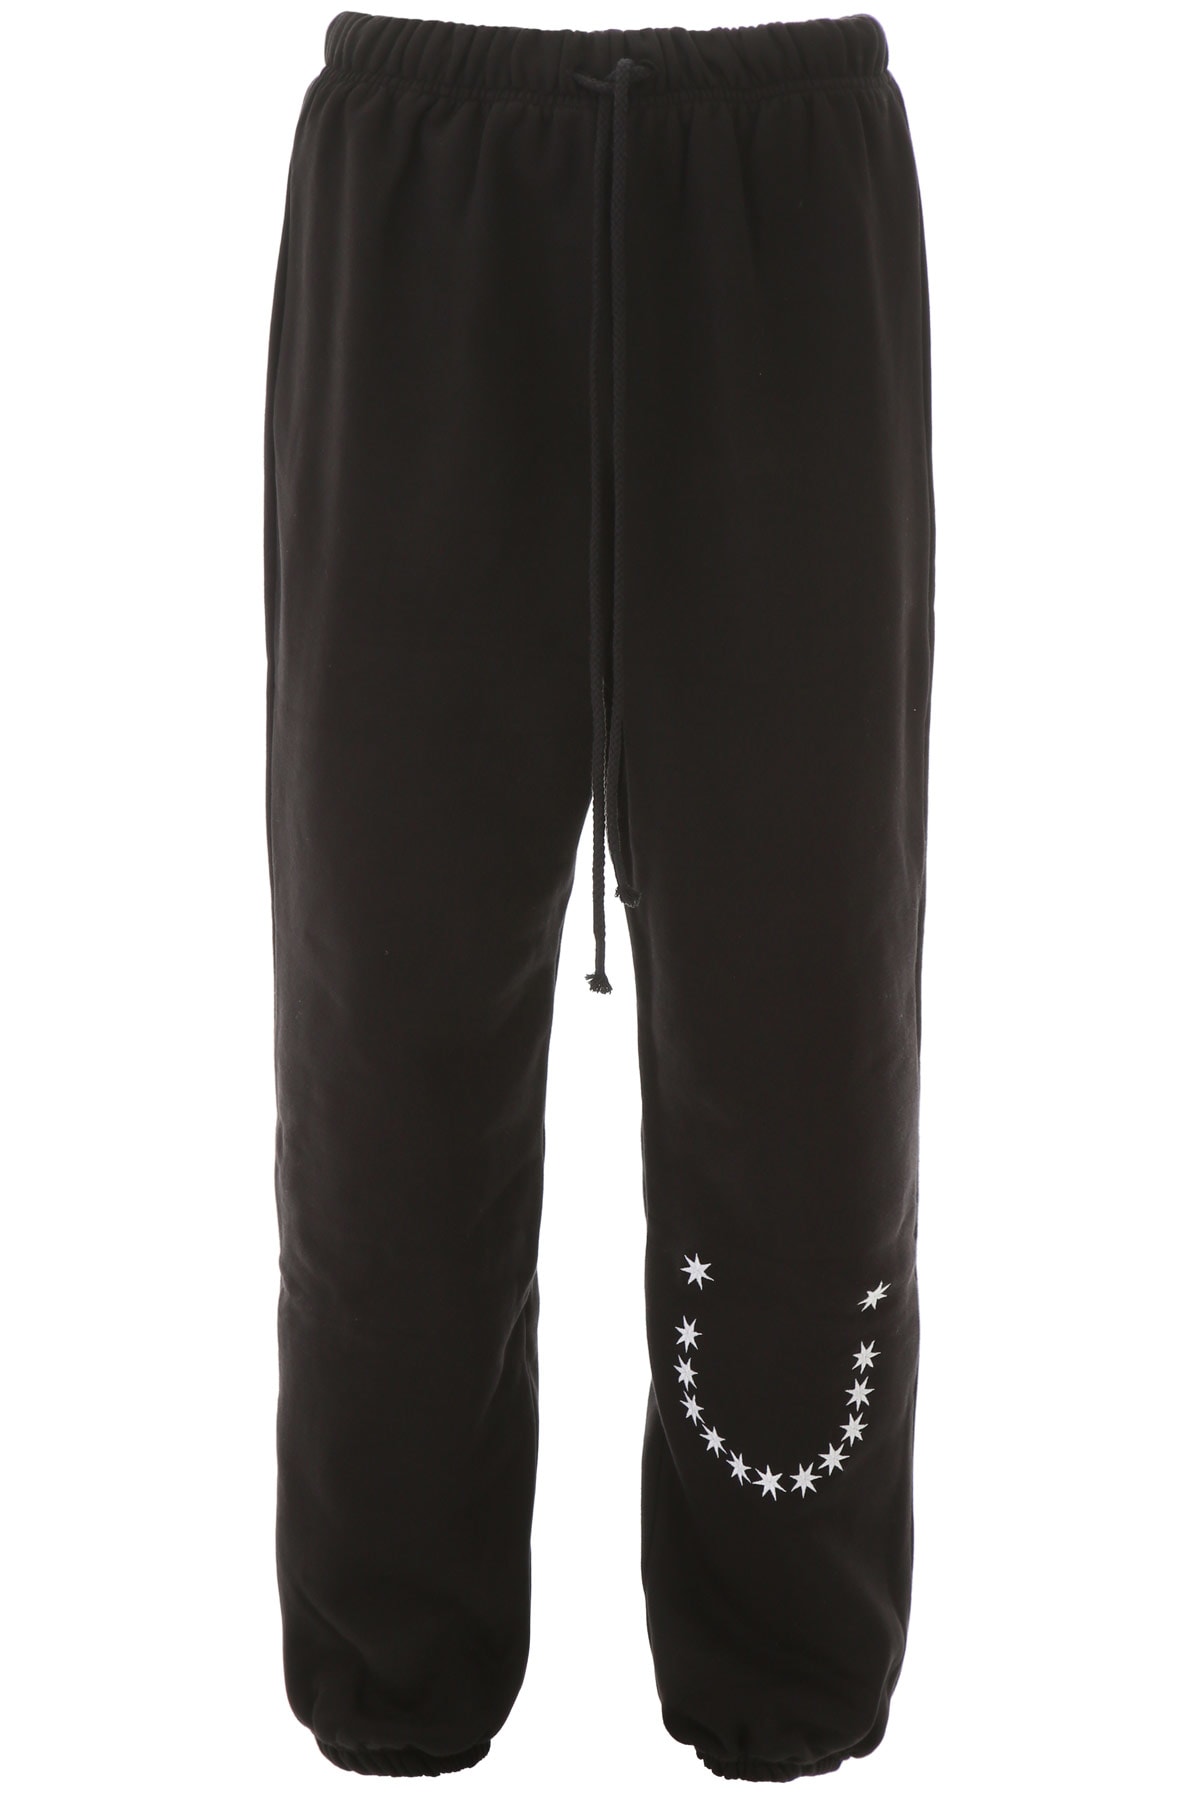 424 STARS EMBROIDERY SWEATtrousers,11306272